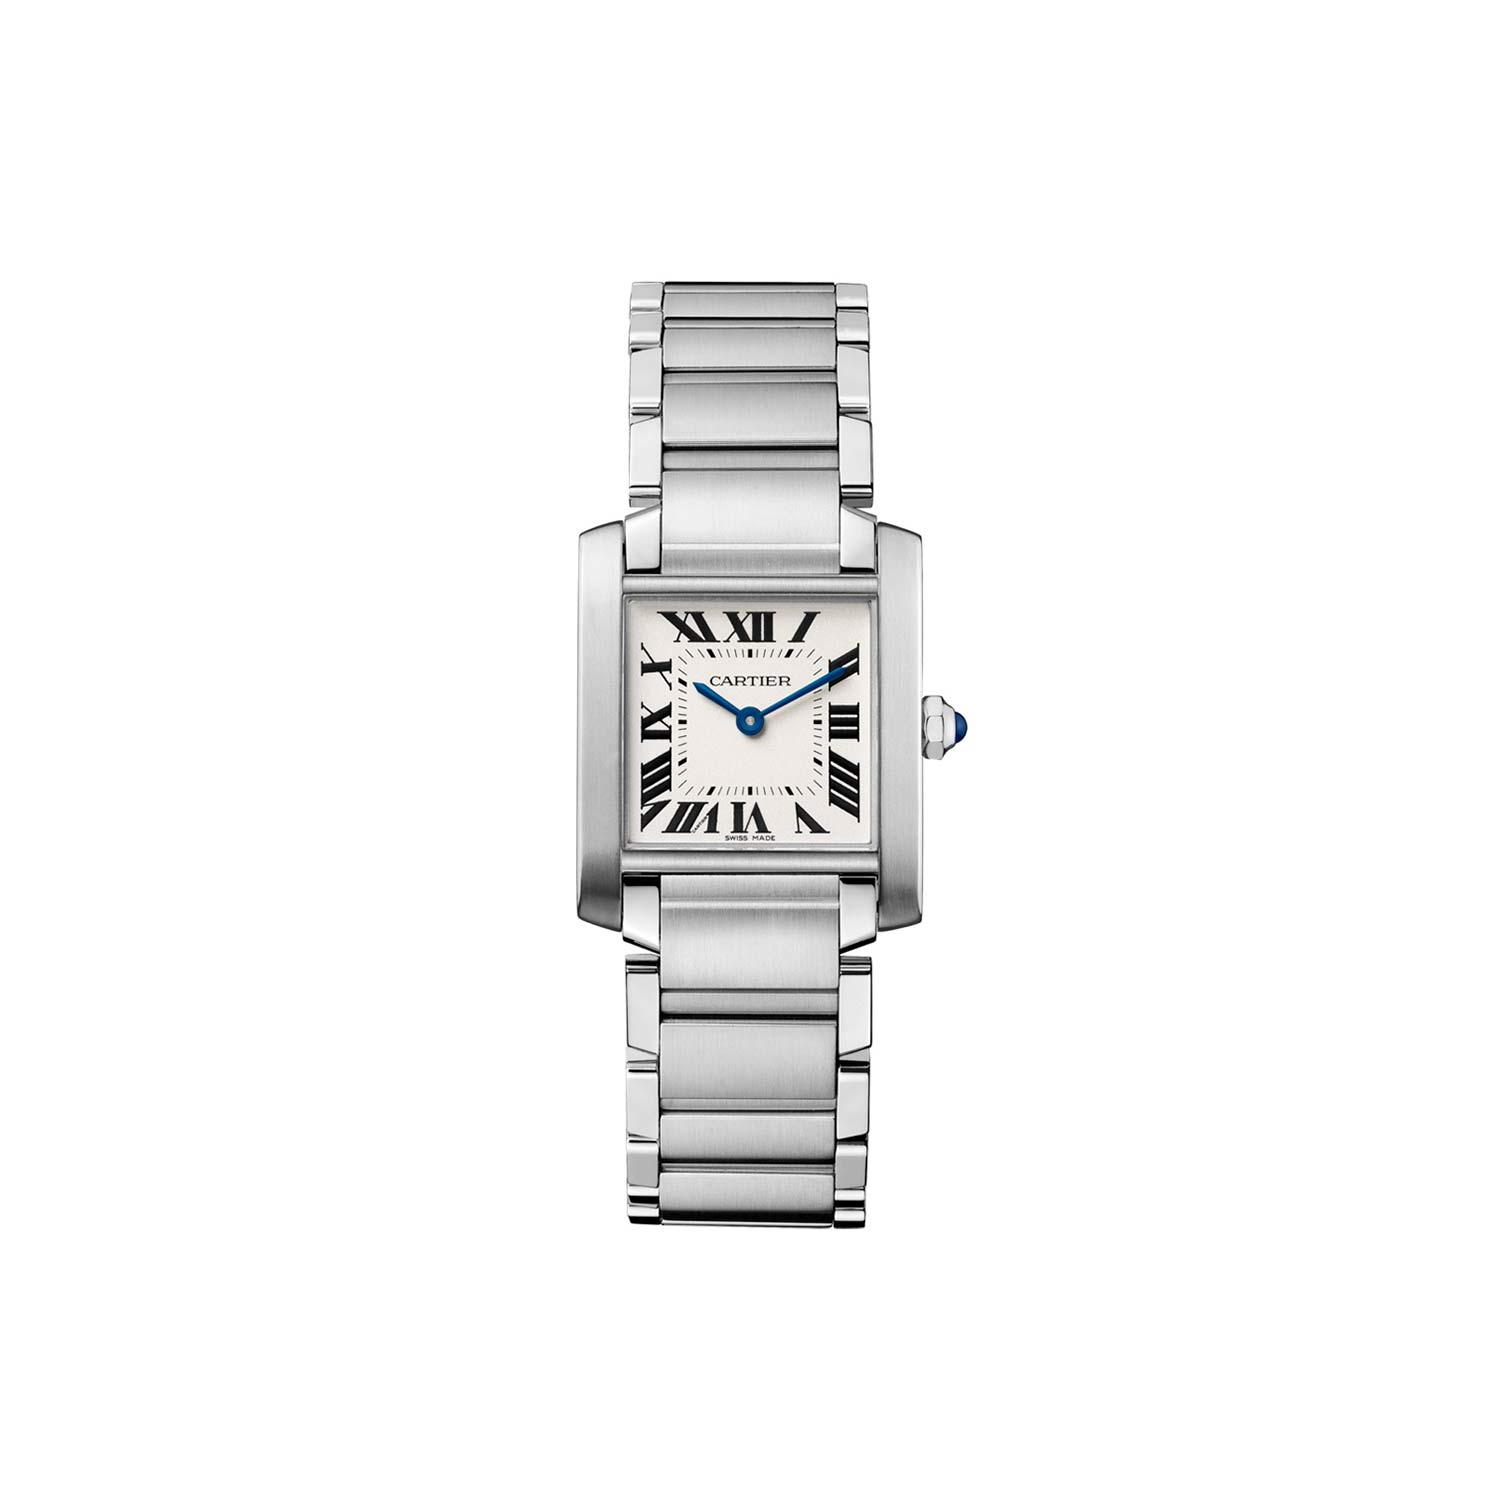 This timepiece is truly a one-of-a-kind watch that should feature on your wrist. | Photo from Cartier